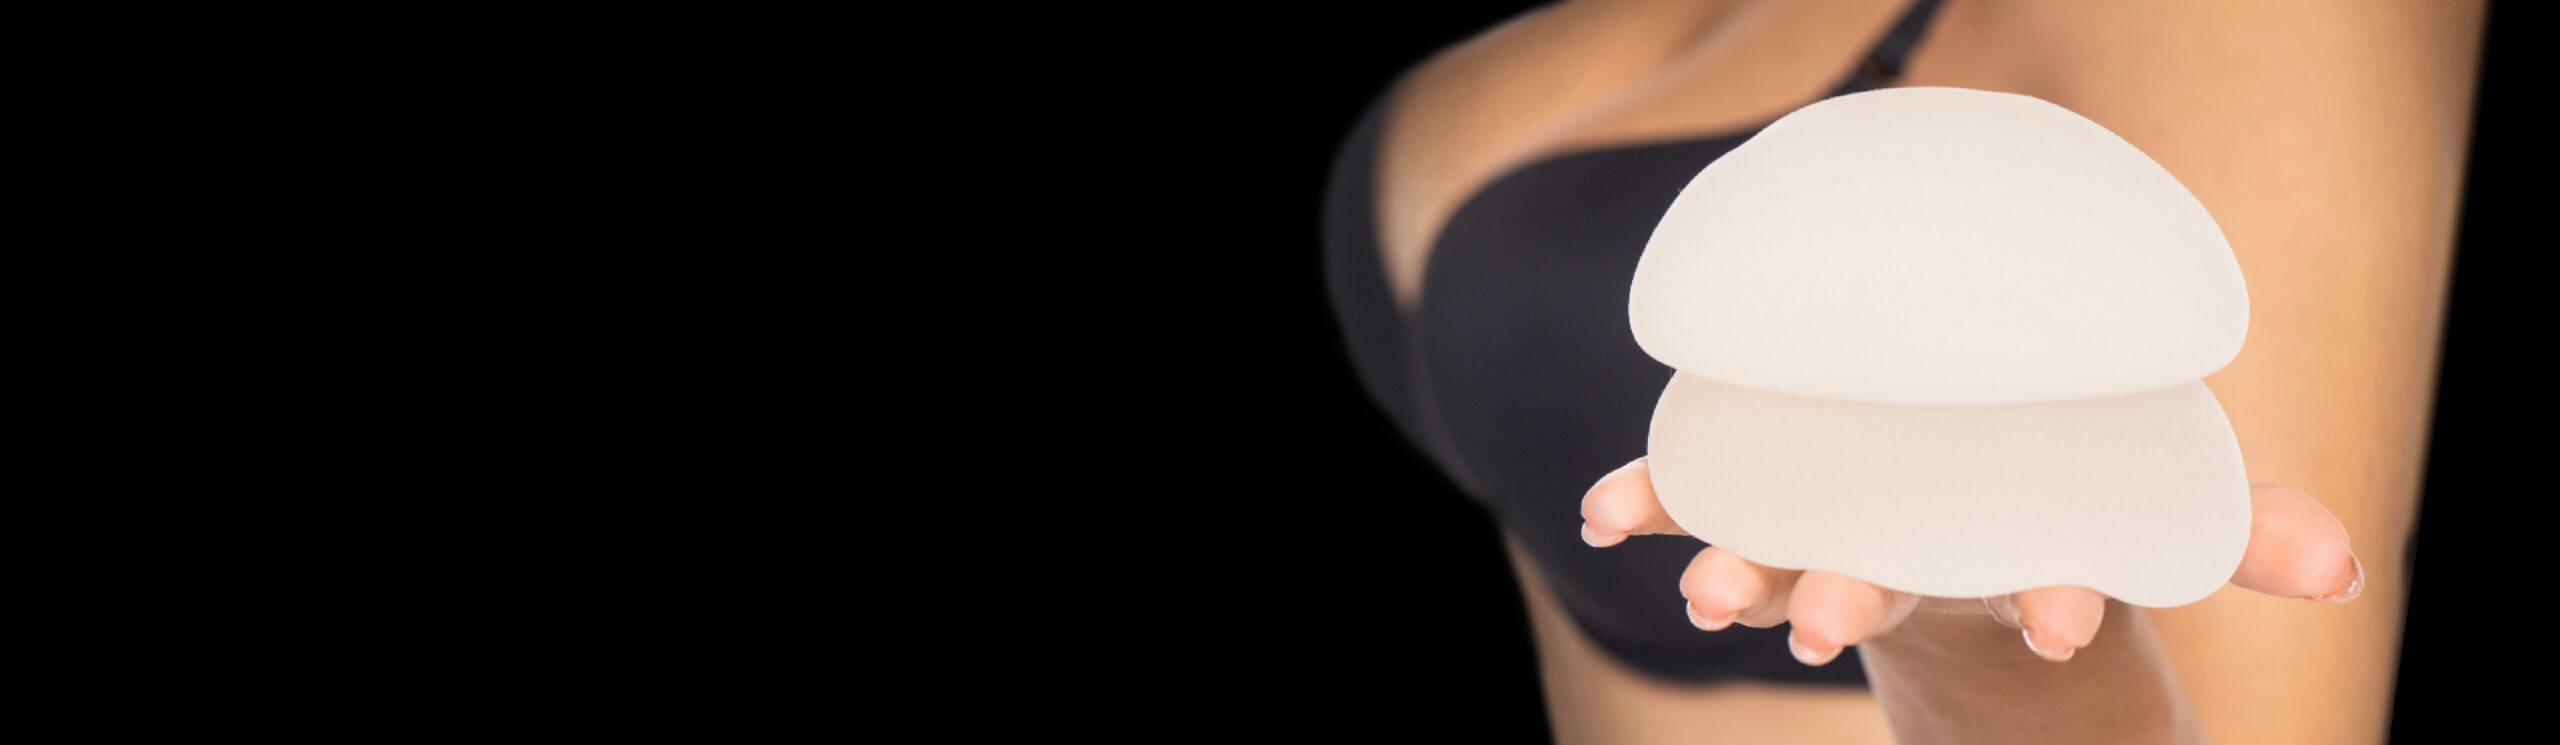 Teardrop vs. Round Implants: Which Breast Implants Are Right For